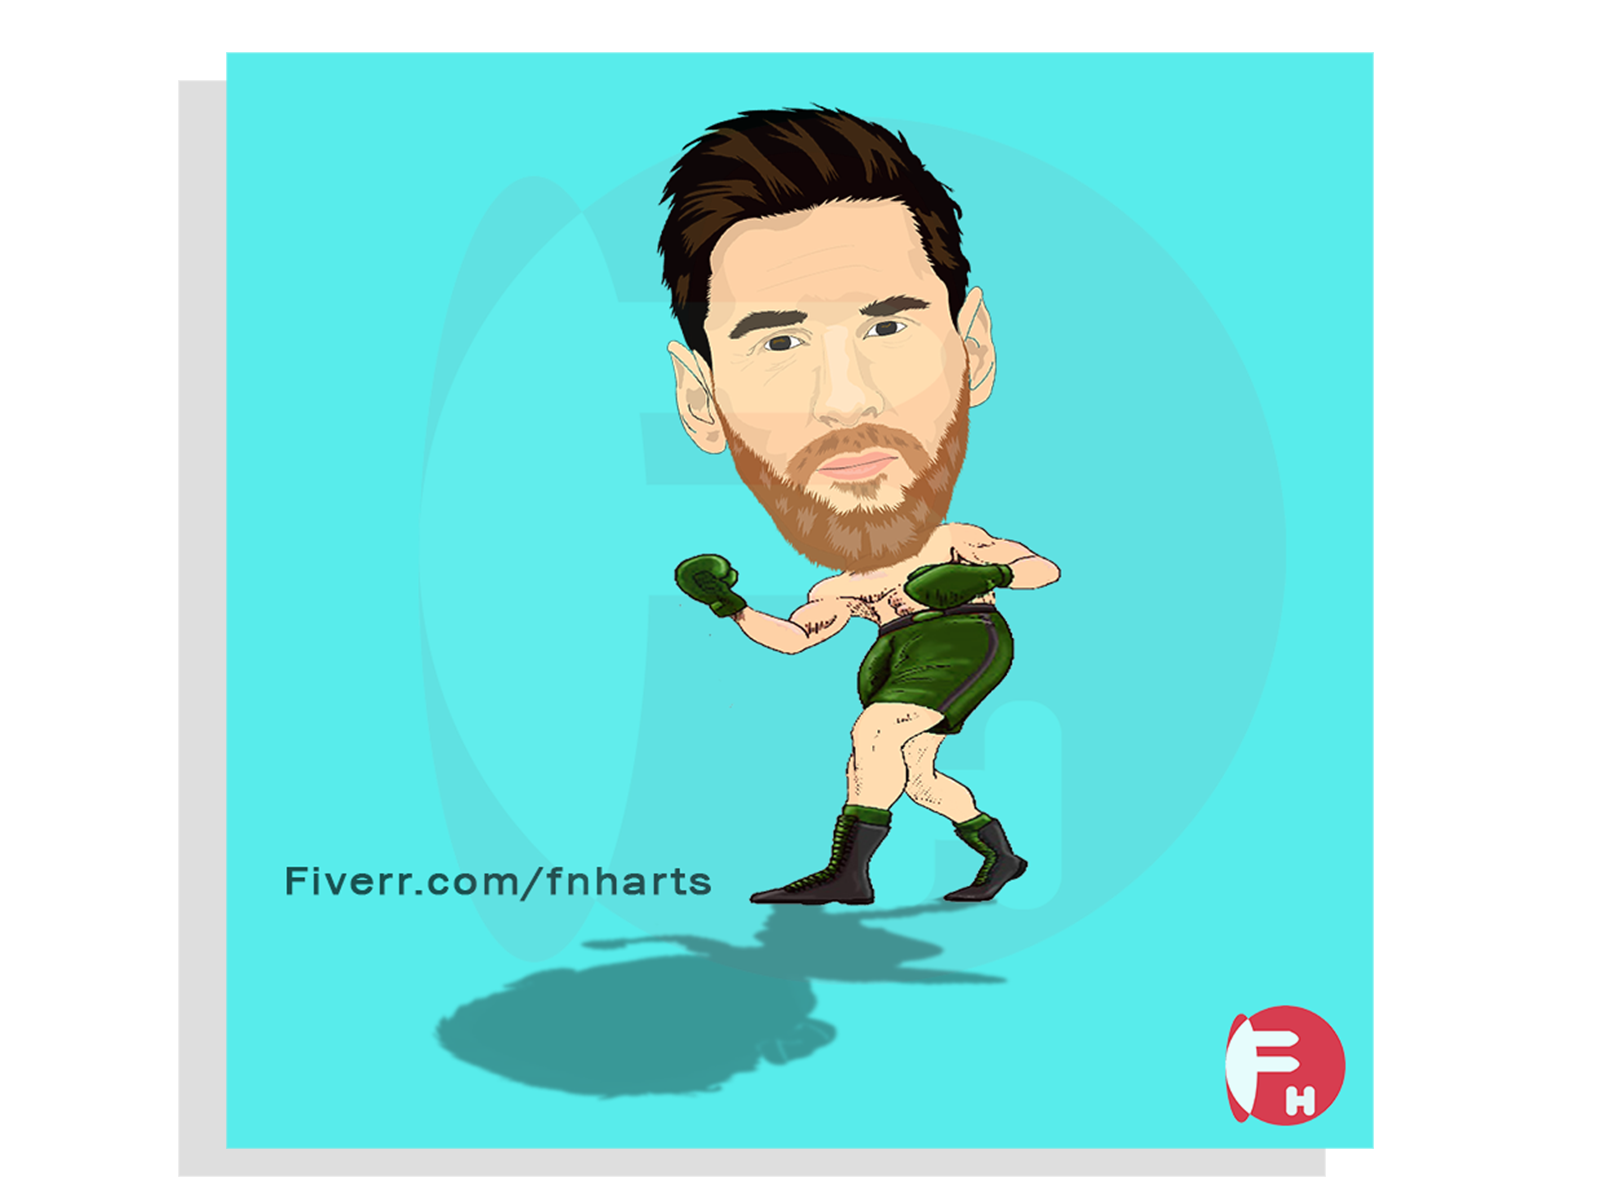 Lionel Messi Cartoon Portrait Caricature by Fnharts on Dribbble